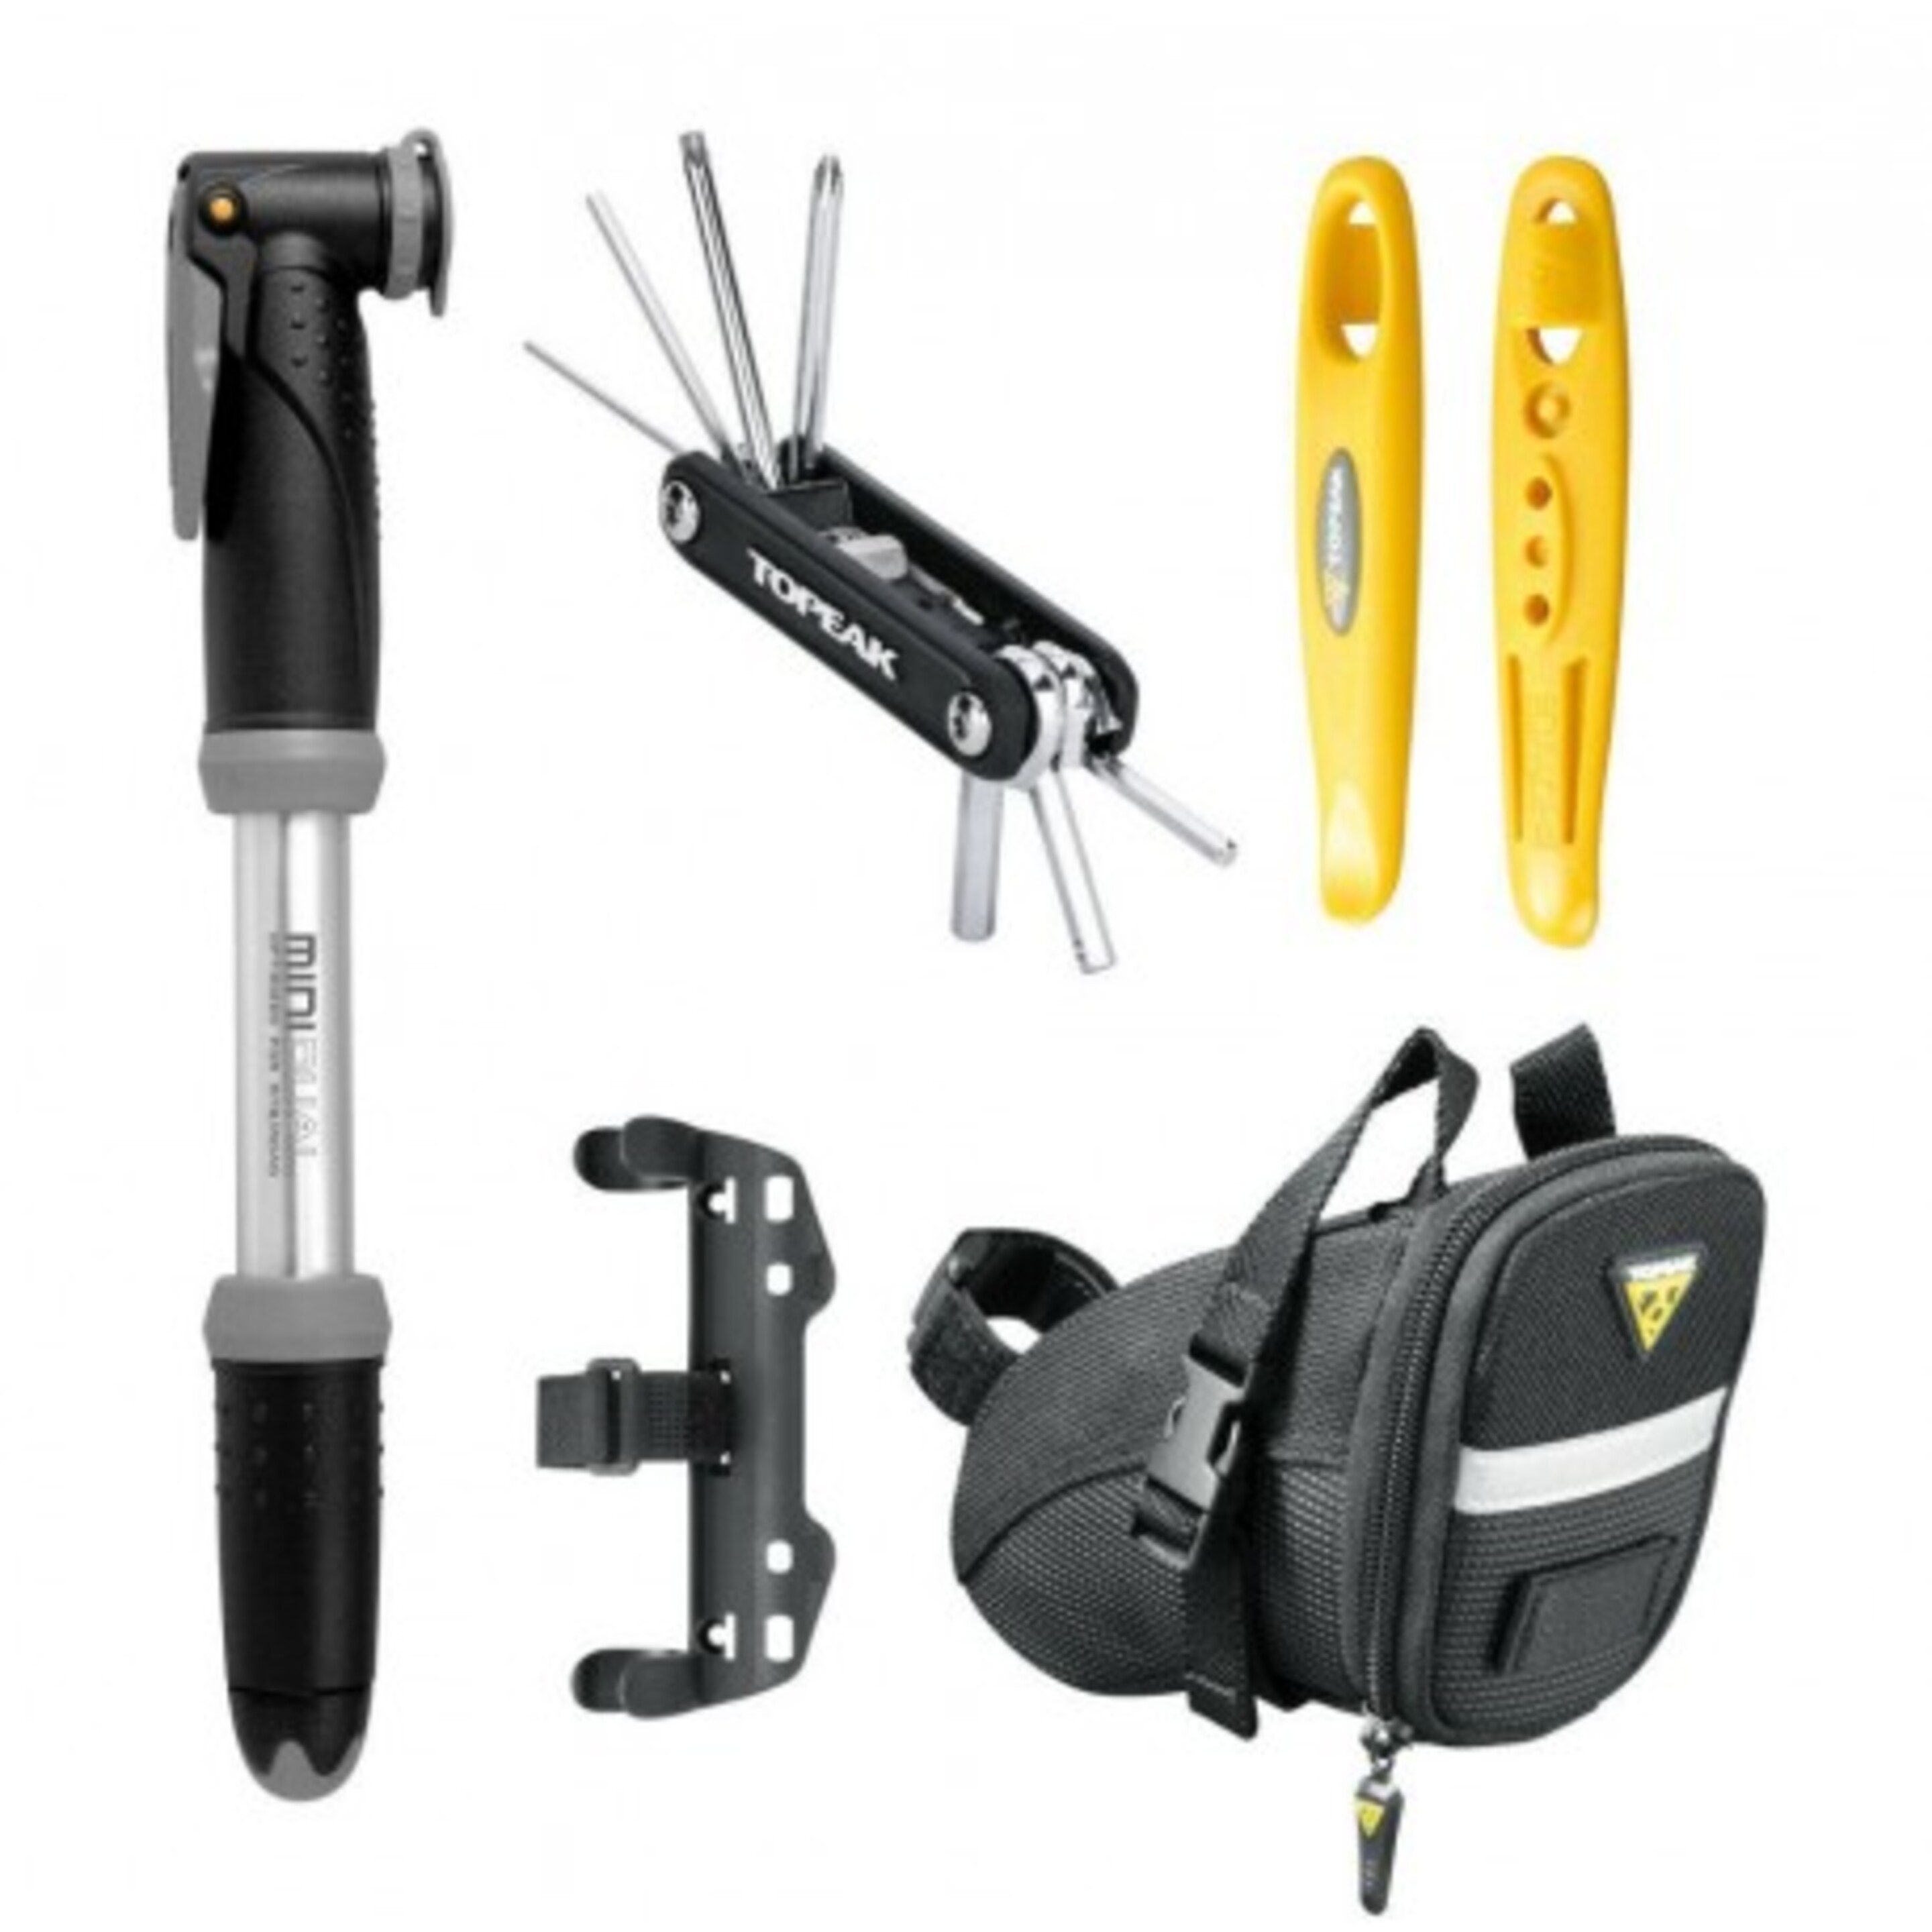 Kit De Ciclismo Deluxe Cycling Accessory Kit Topeak